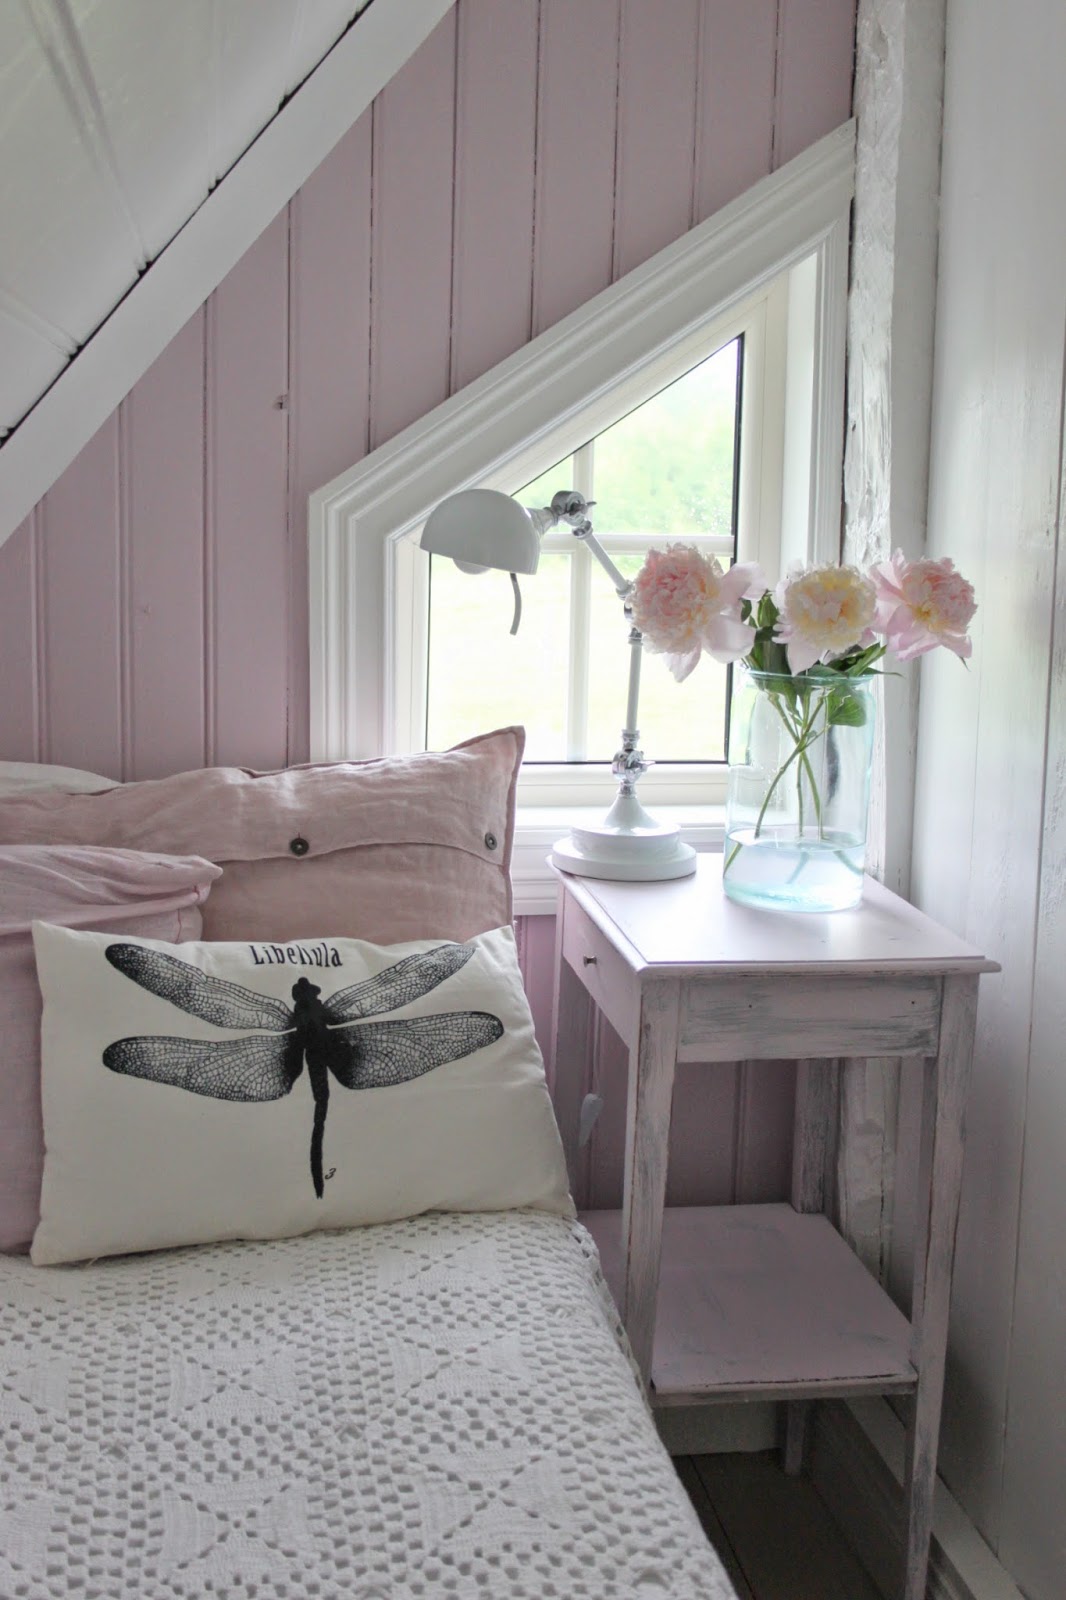 Loft Conversion Ideas The Girls, How To Enclose Loft Bedroom Ideas For Small Rooms